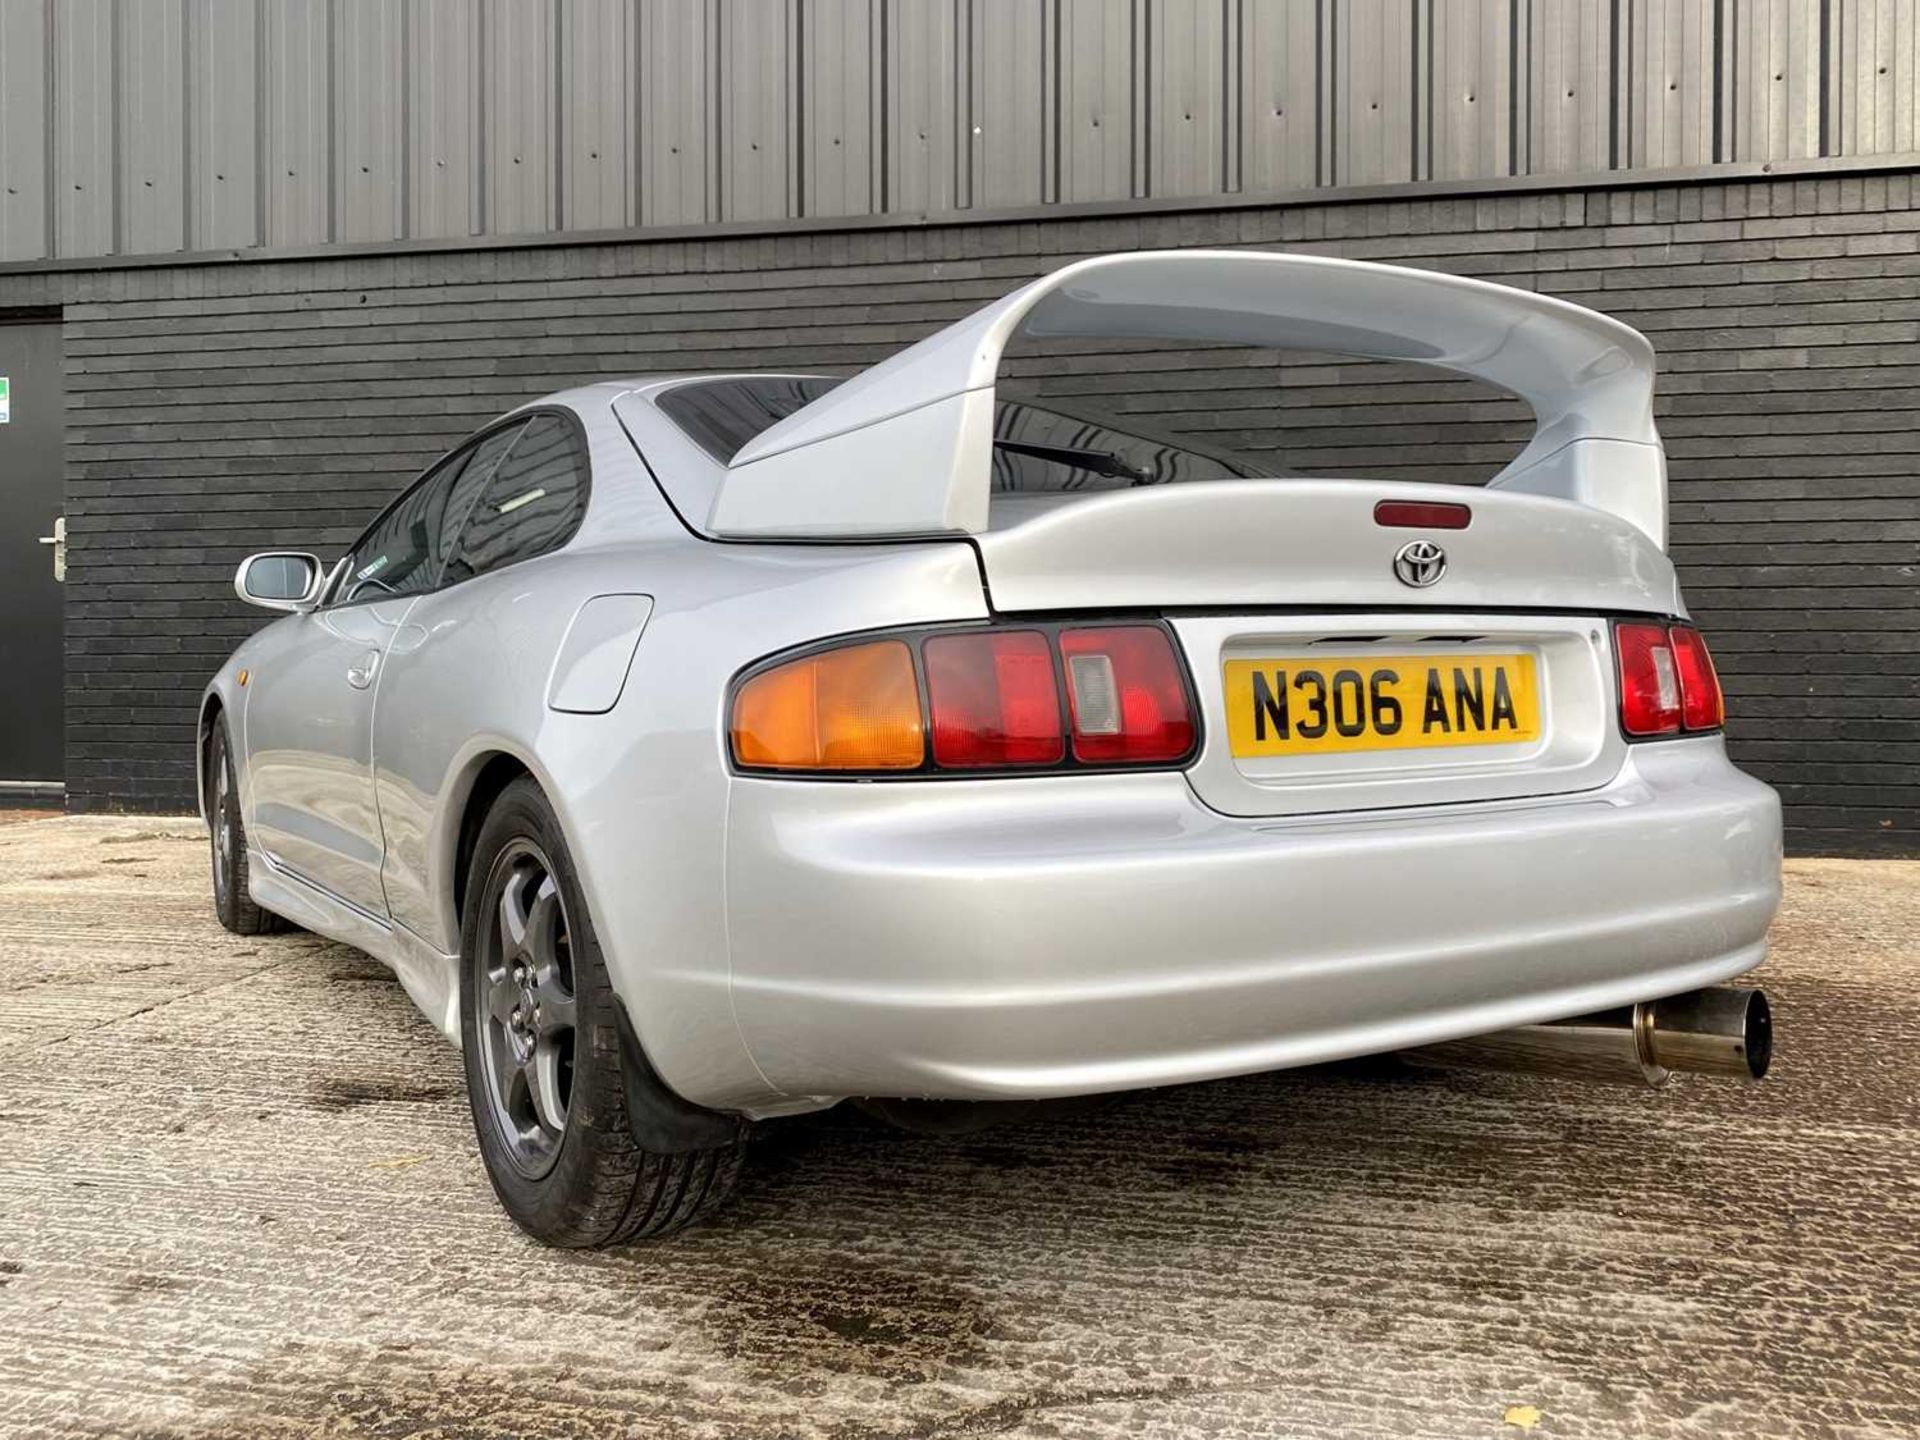 1996 Toyota Celica GT4 ST205 - Image 17 of 65